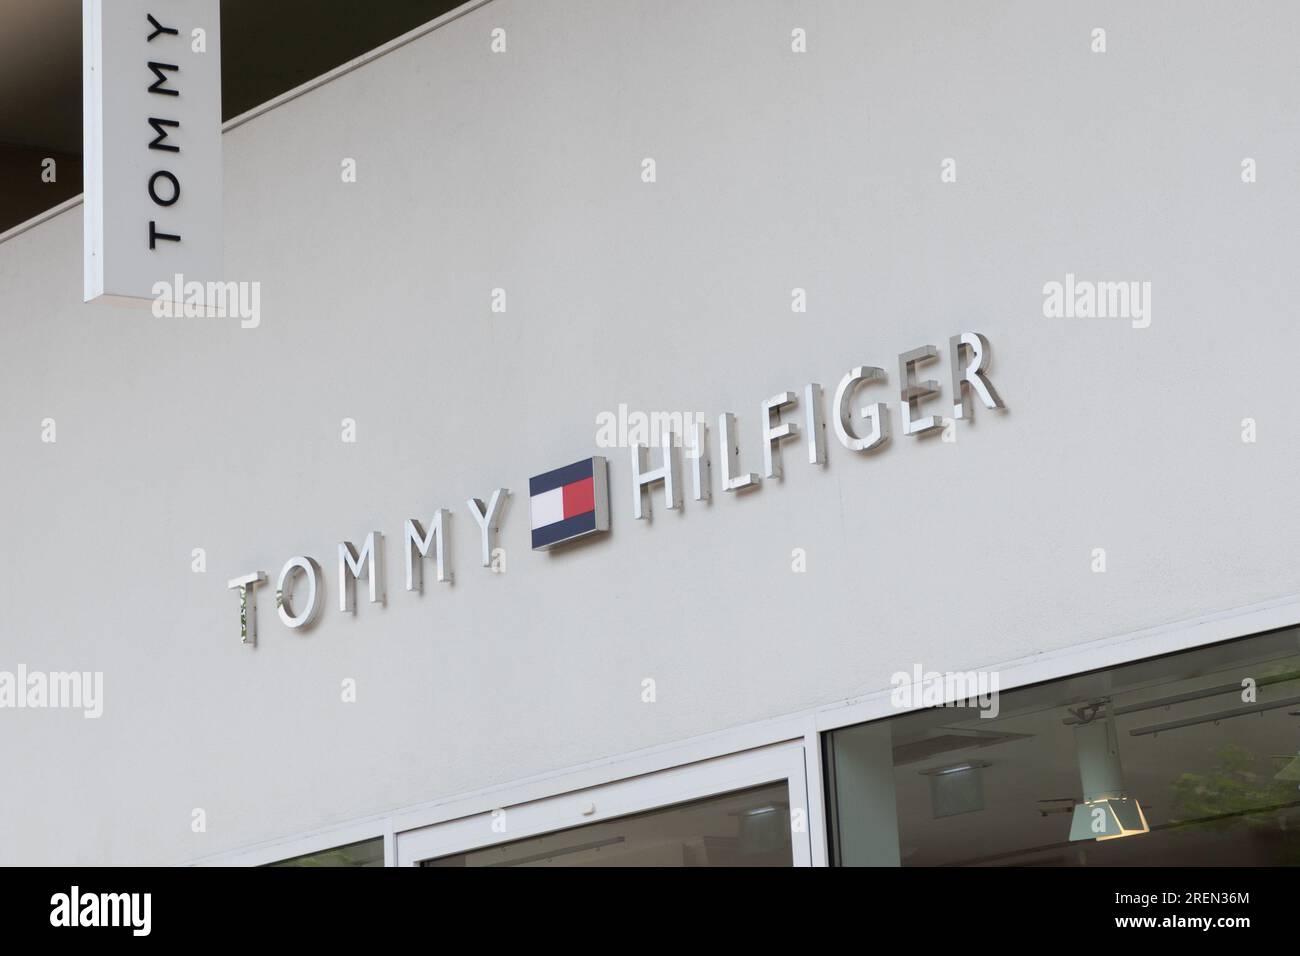 Bordeaux , France - 07 25 2023 : Tommy Hilfiger sign text and brand ...